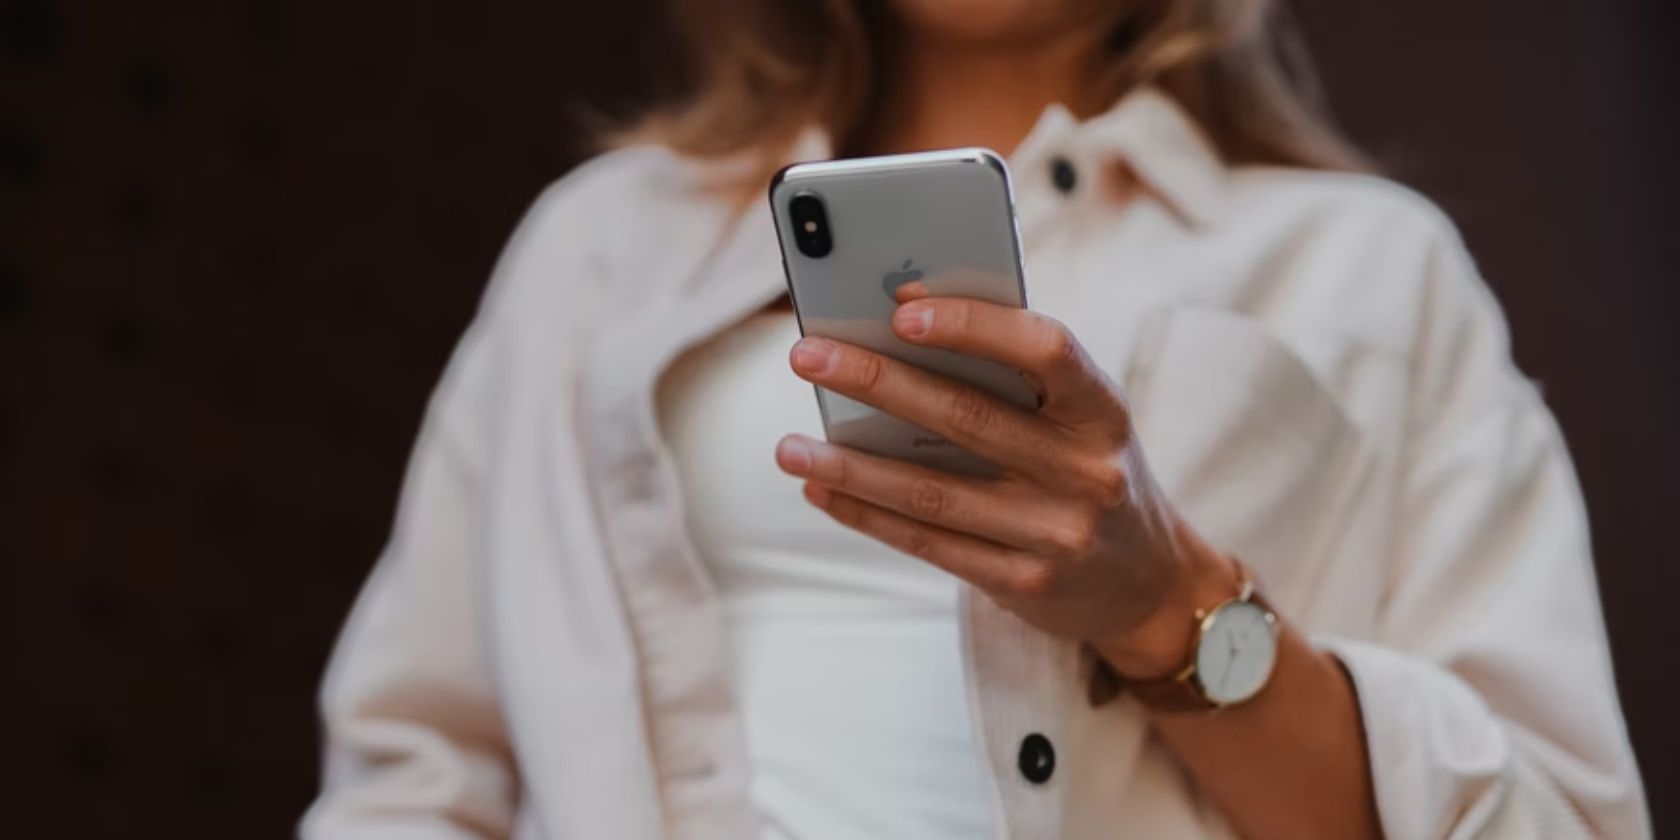 woman wearing white jacket holding an iphone